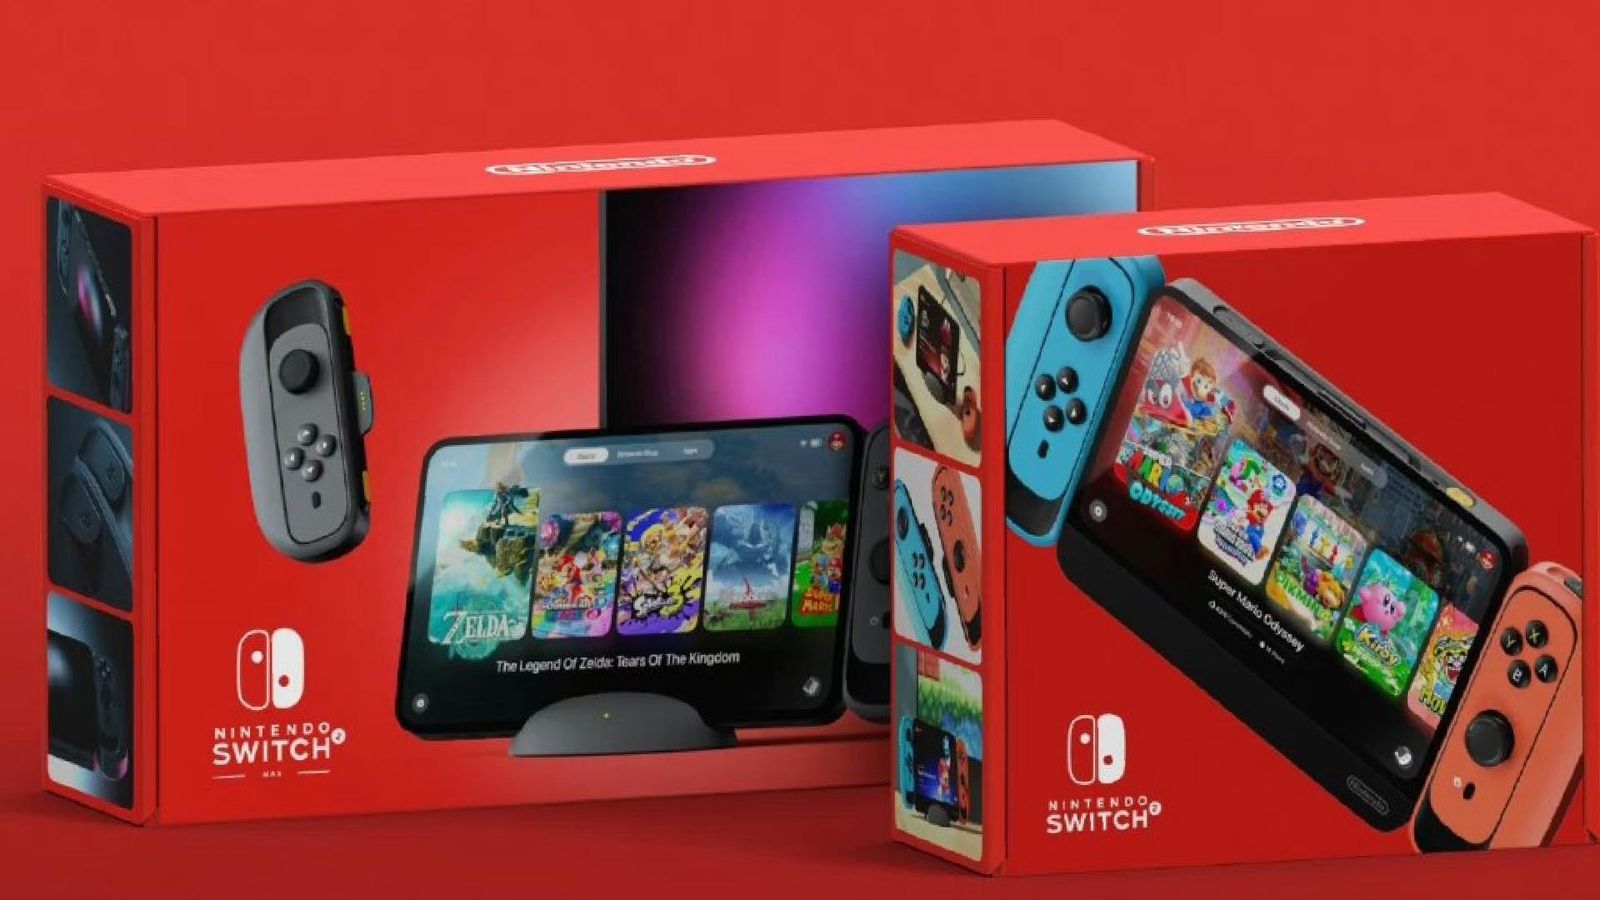 Fake Nintendo switch 2 leaked box showing a proposed retail packaging for the next-gen console 